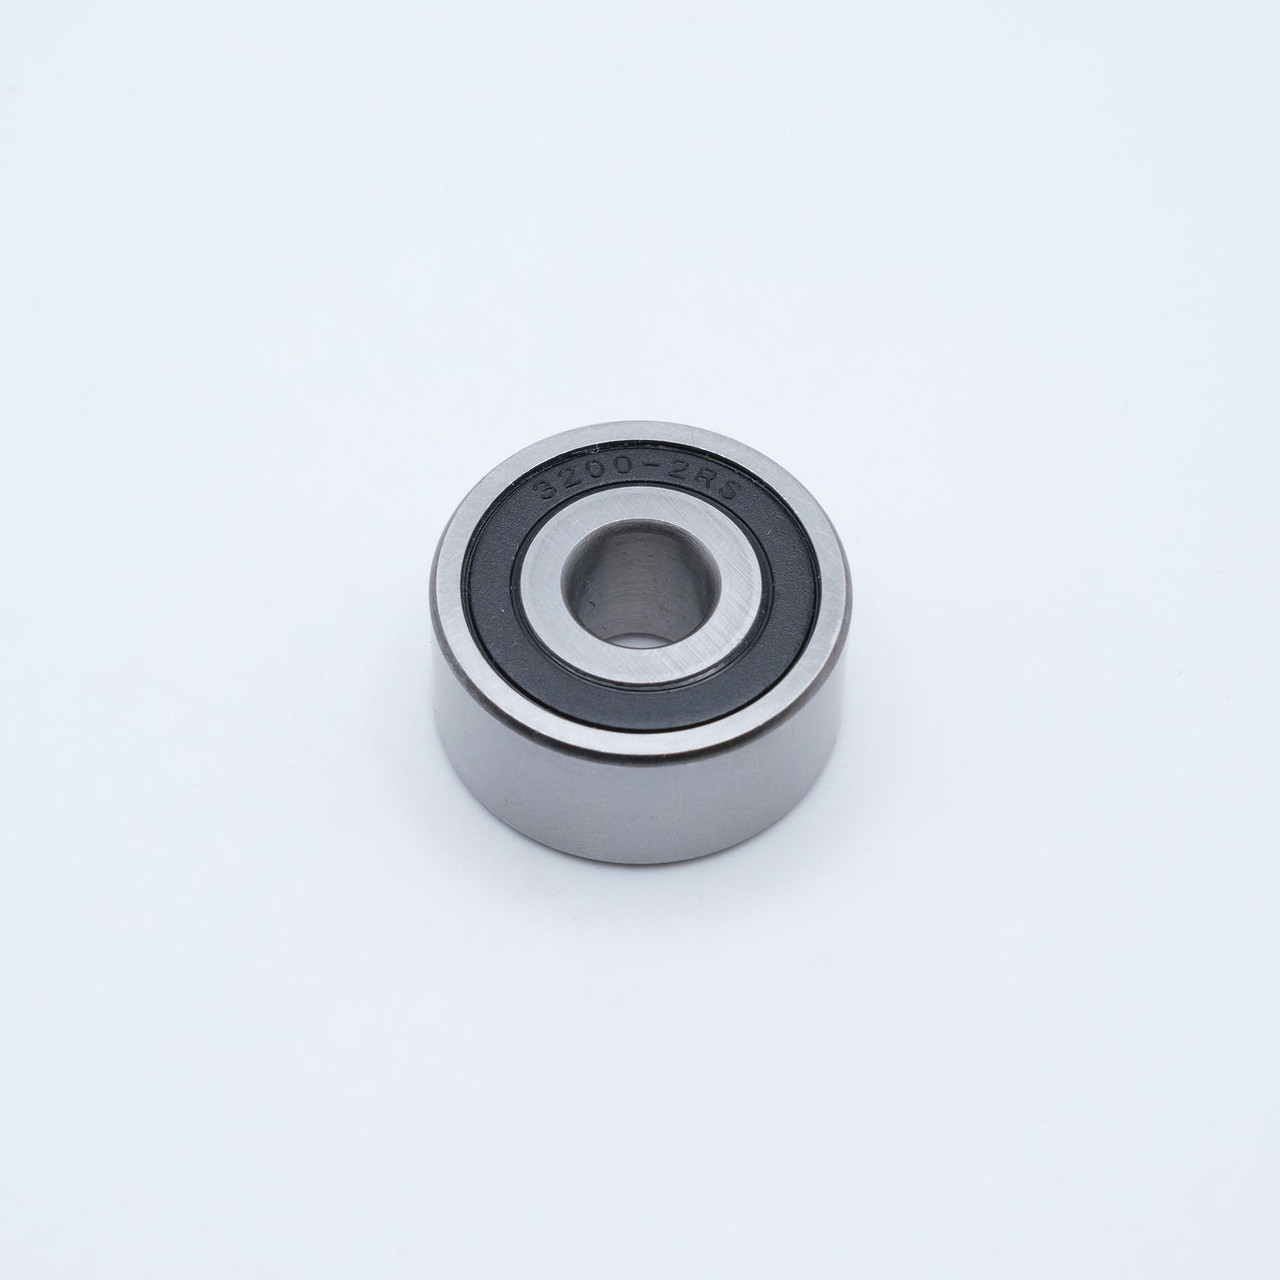 5206-2RS Double Row Ball Bearing 30x62x23.8mm Front View